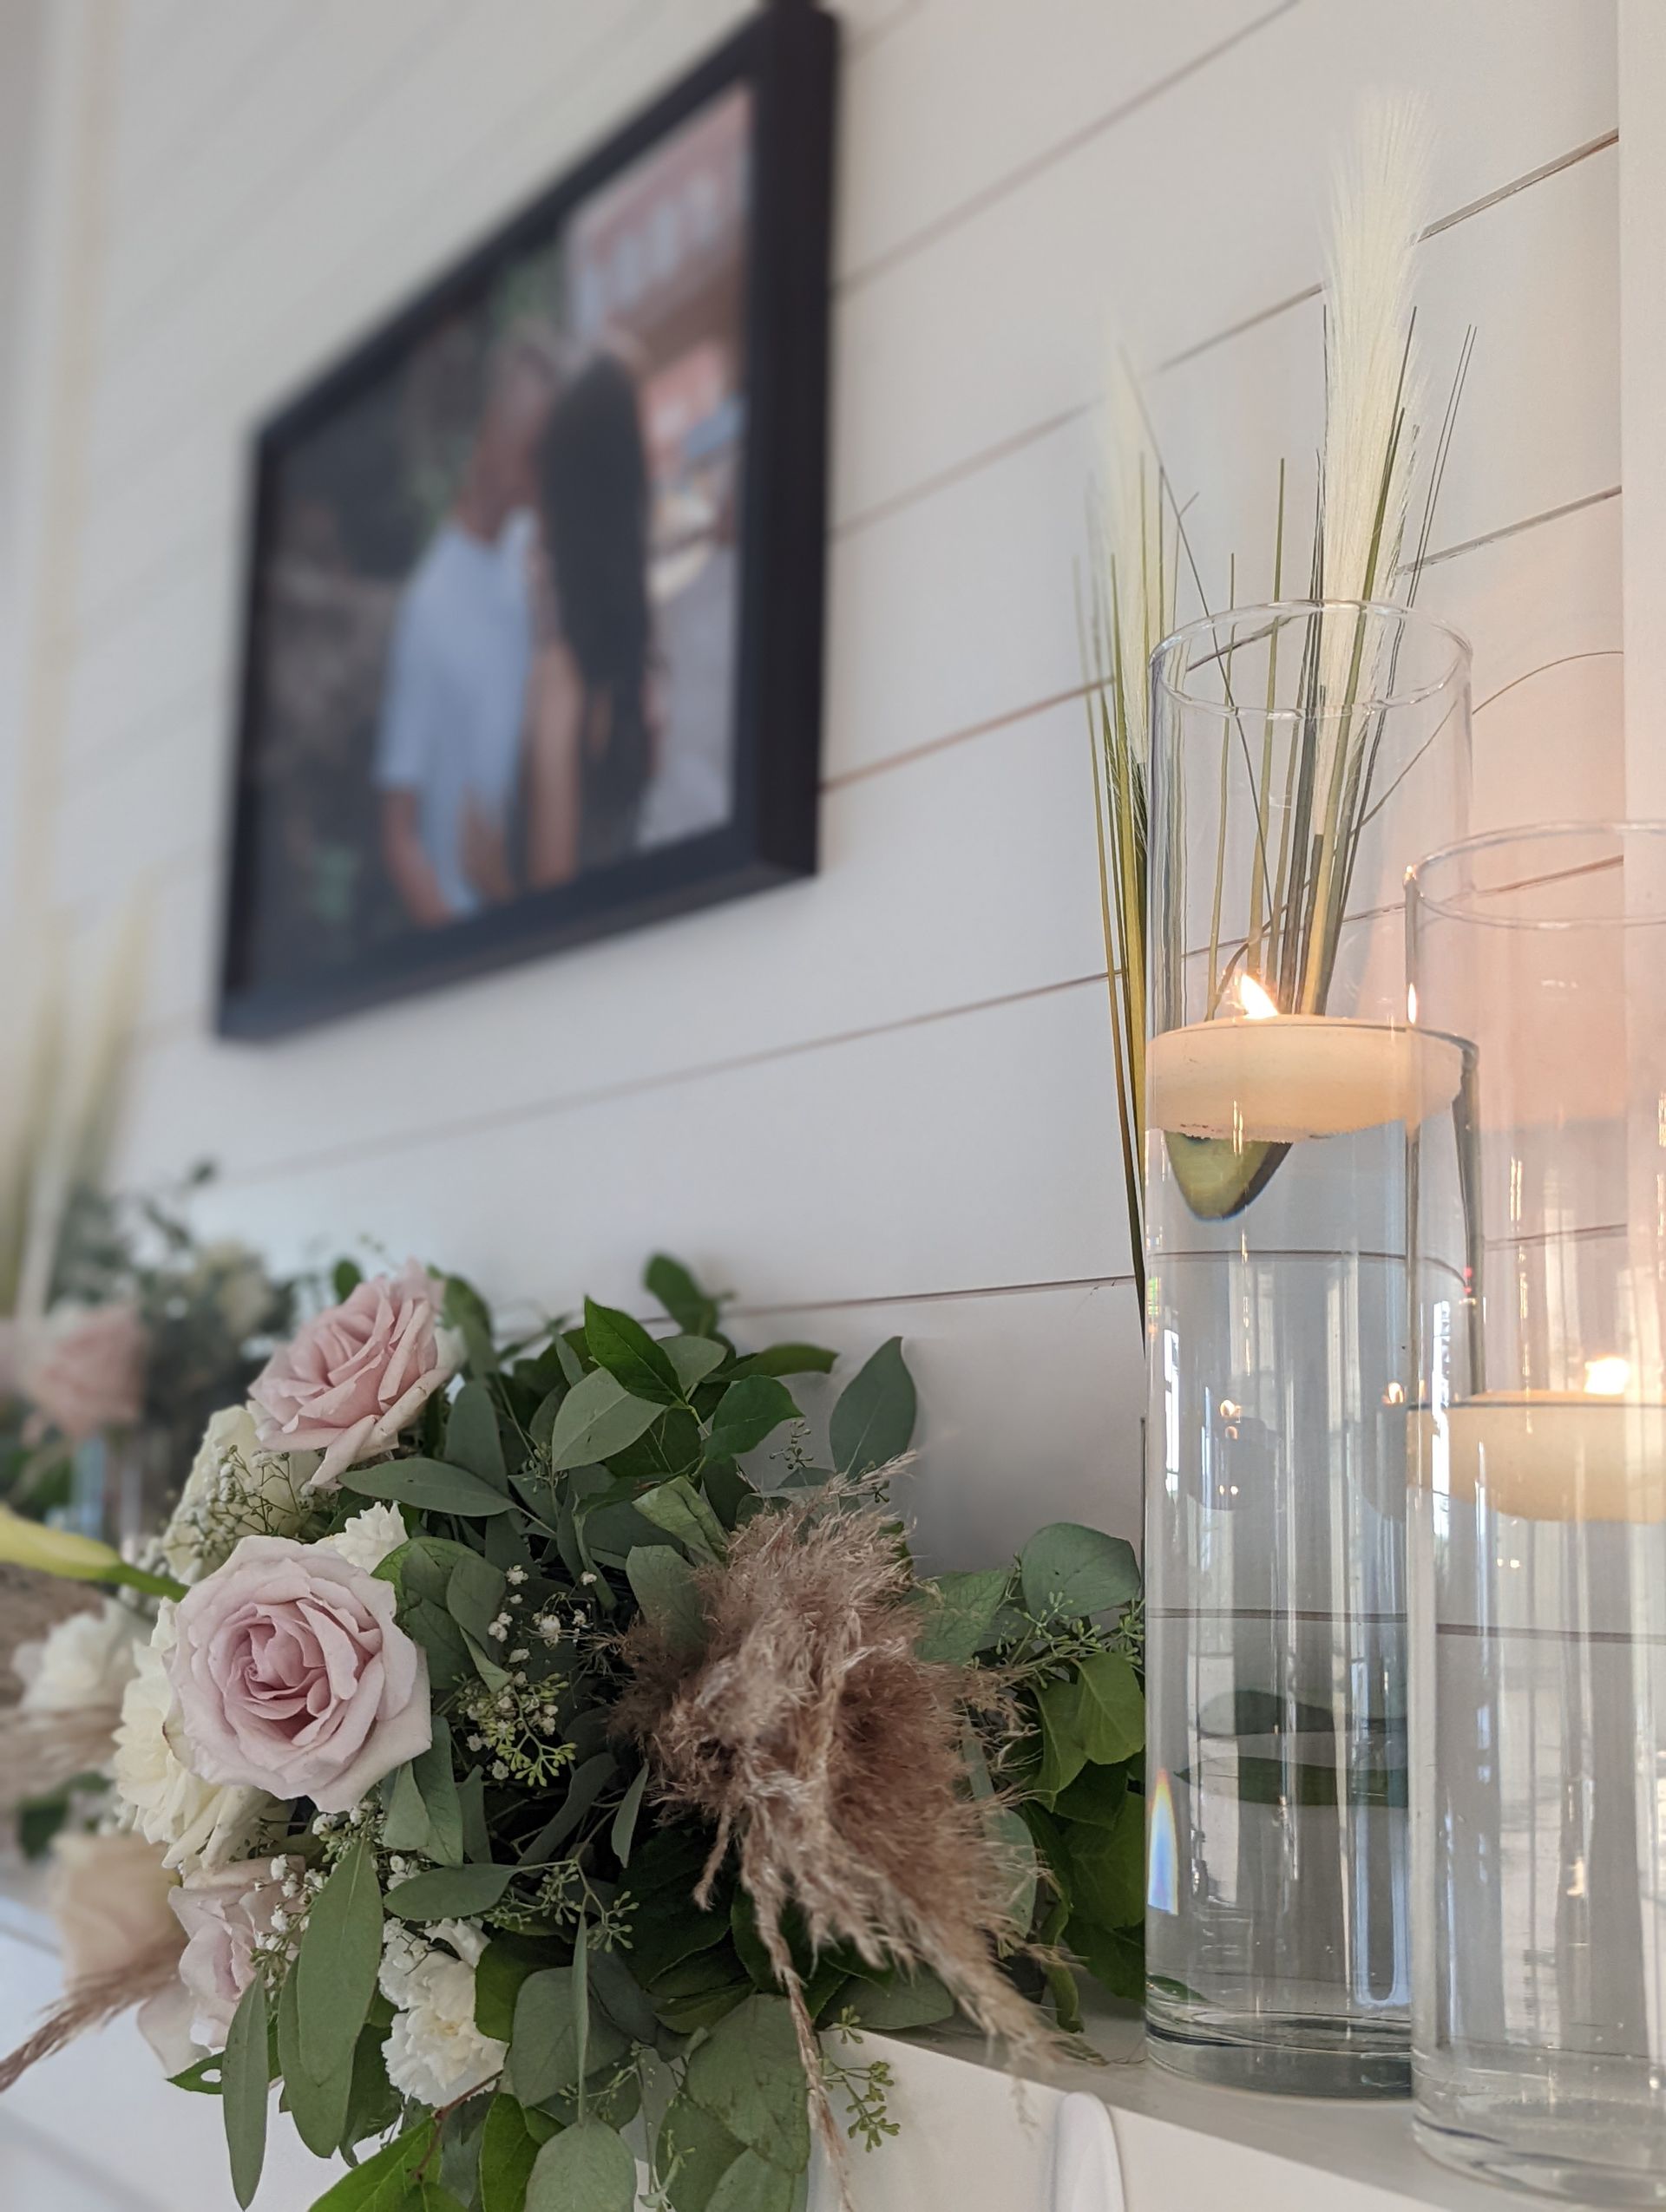 Top 5 Money-Saving Tips for Wedding Flowers You Need to Know